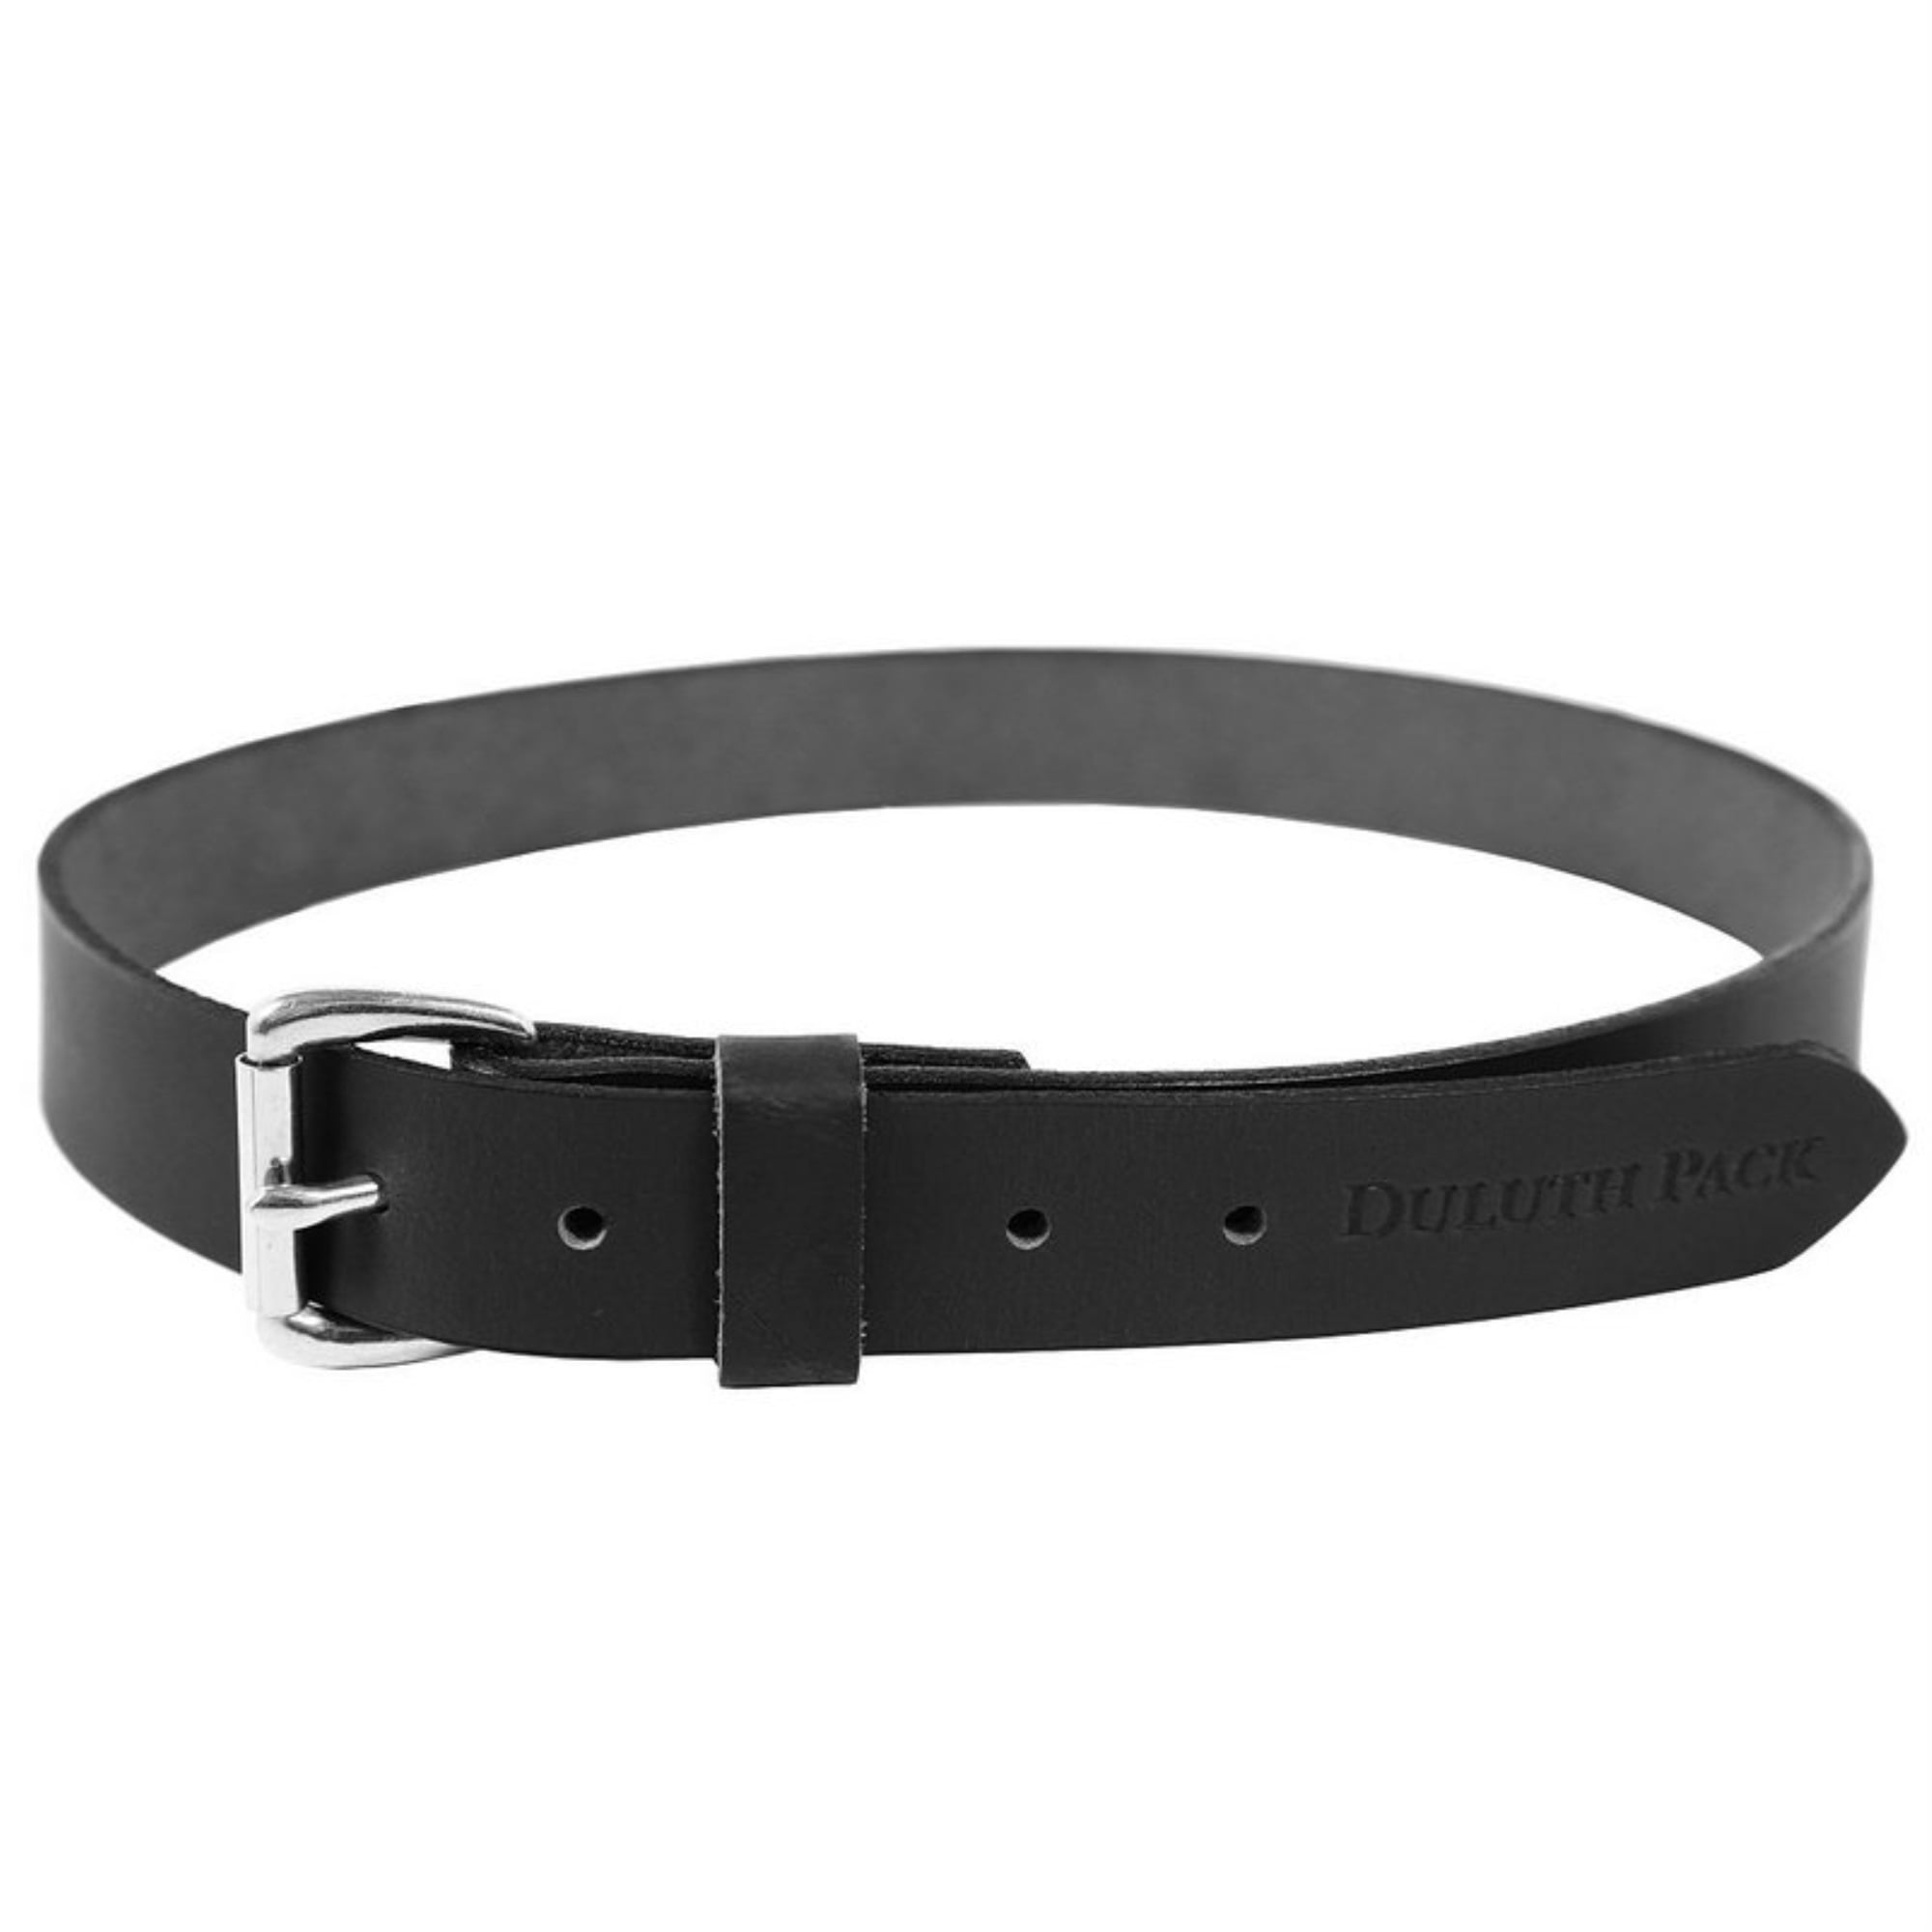 DULUTH PACK LEATHER BELT 1.5 X 38